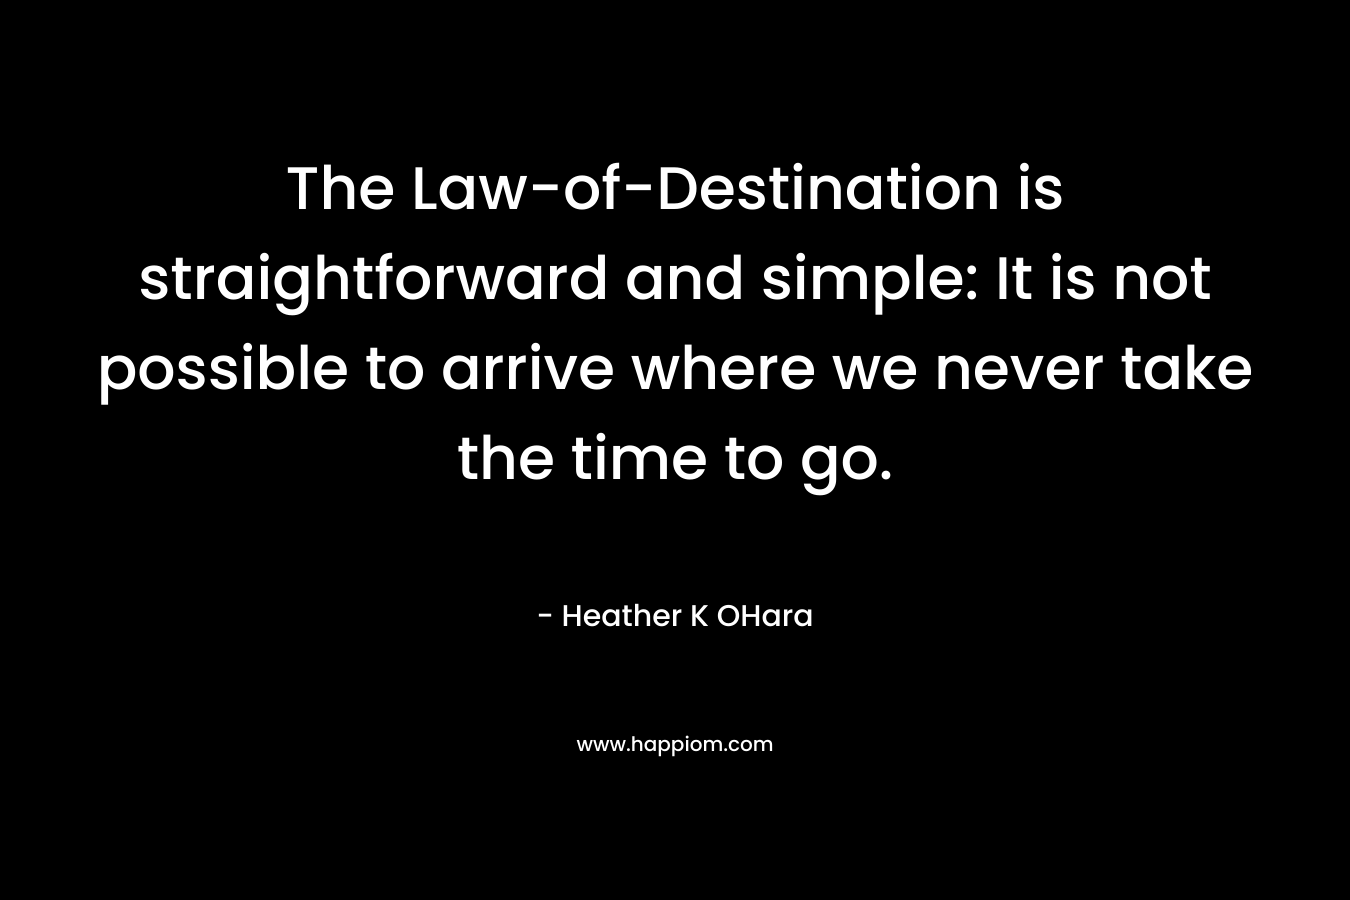 The Law-of-Destination is straightforward and simple: It is not possible to arrive where we never take the time to go.